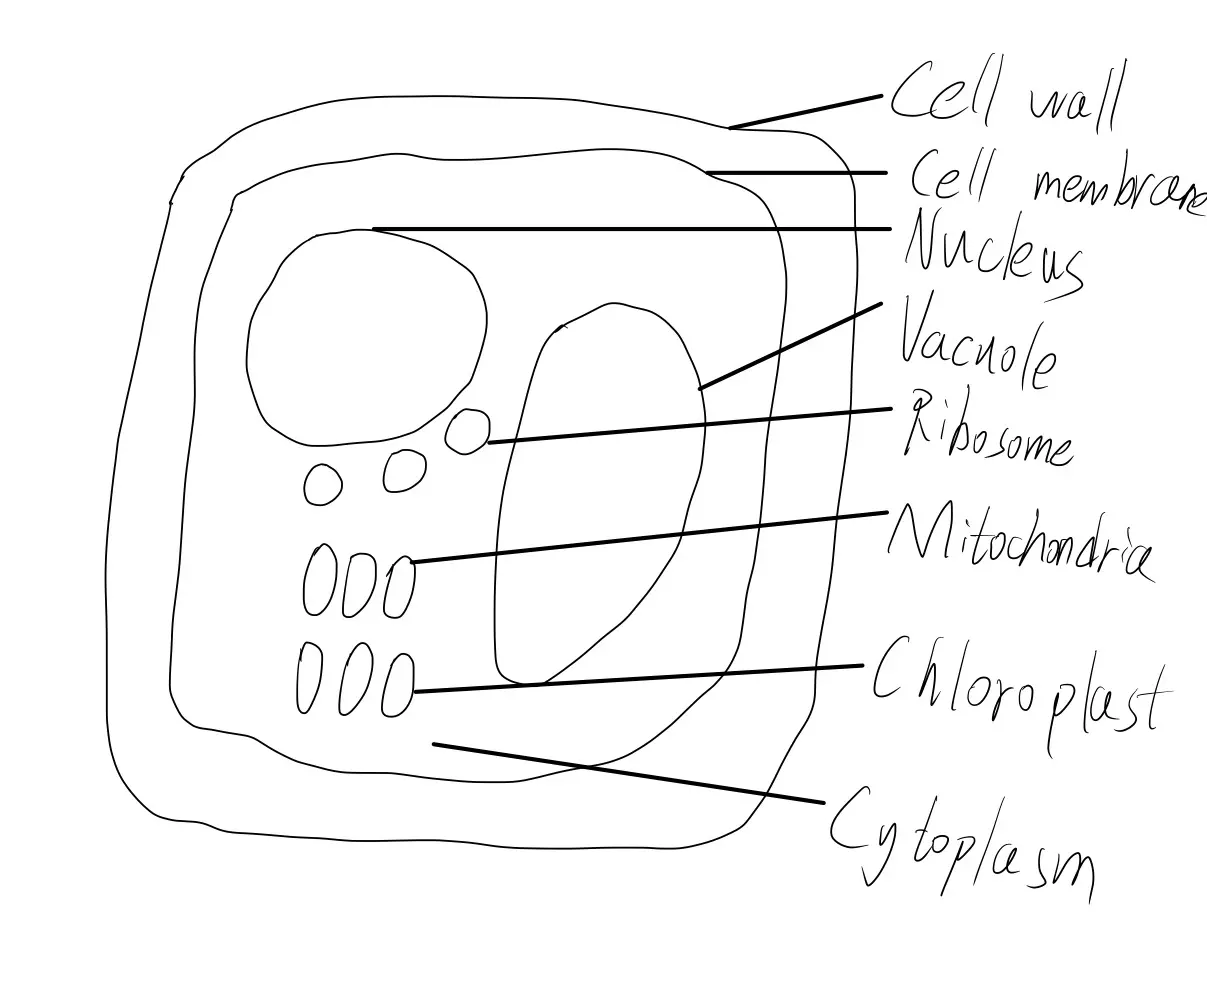 Plant cell diagram